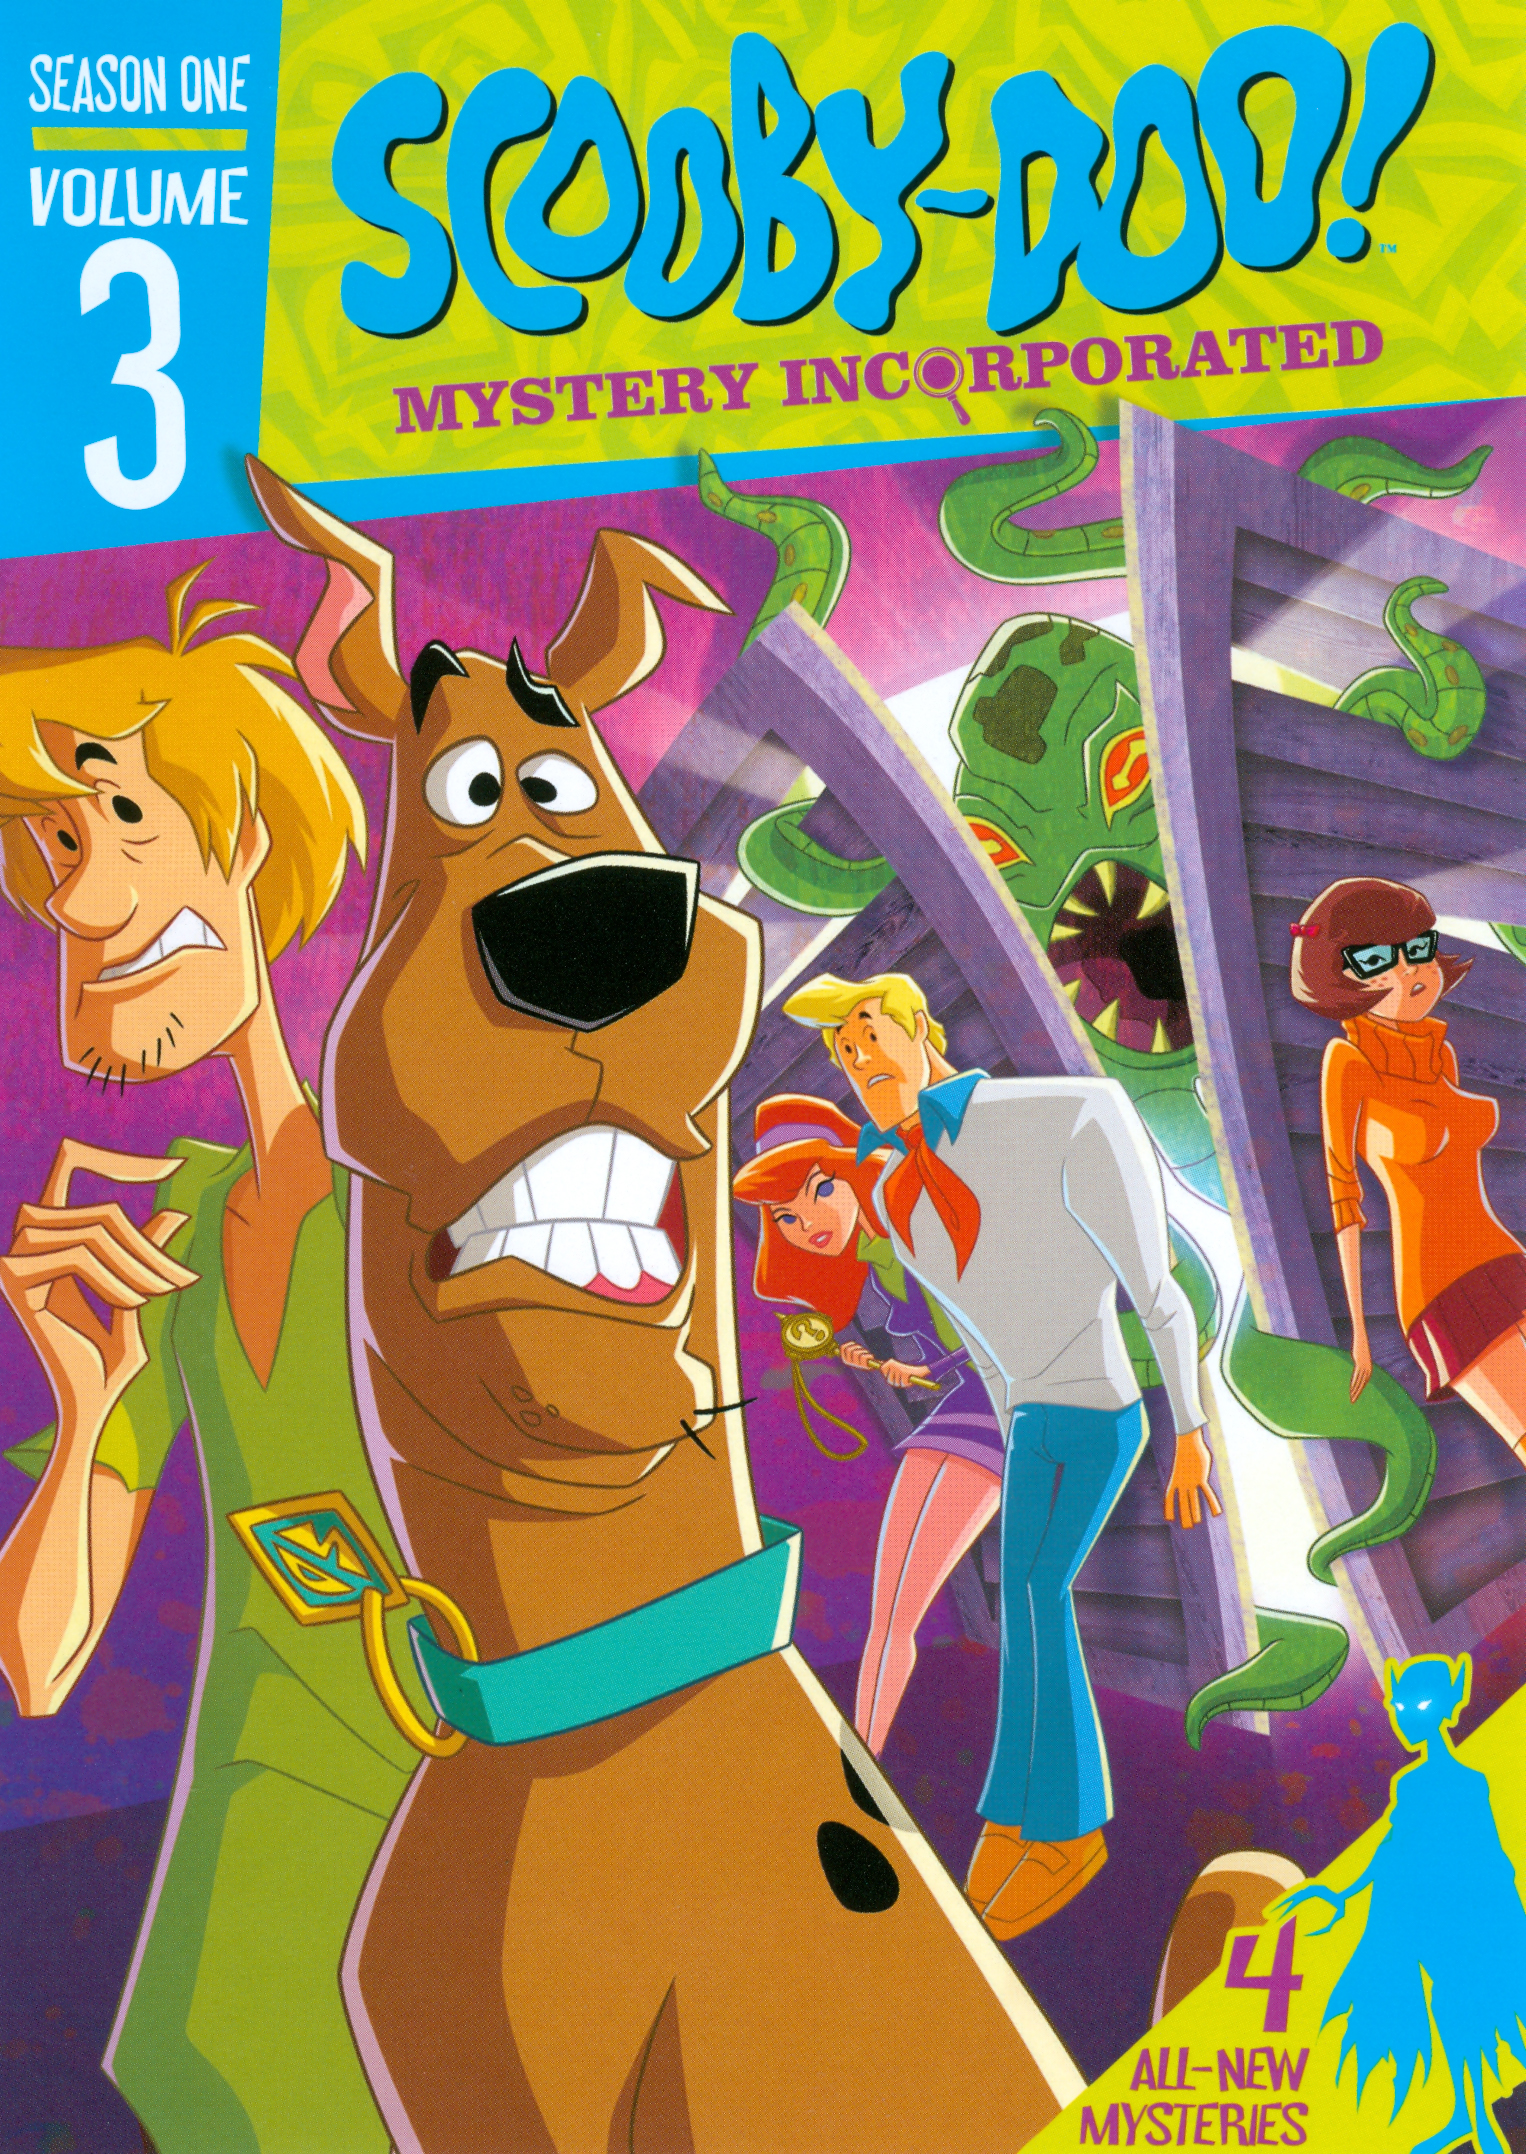 A LICENSED NEW Mystery Incorporated Movie POSTER 27 x 40 Scooby-Doo.